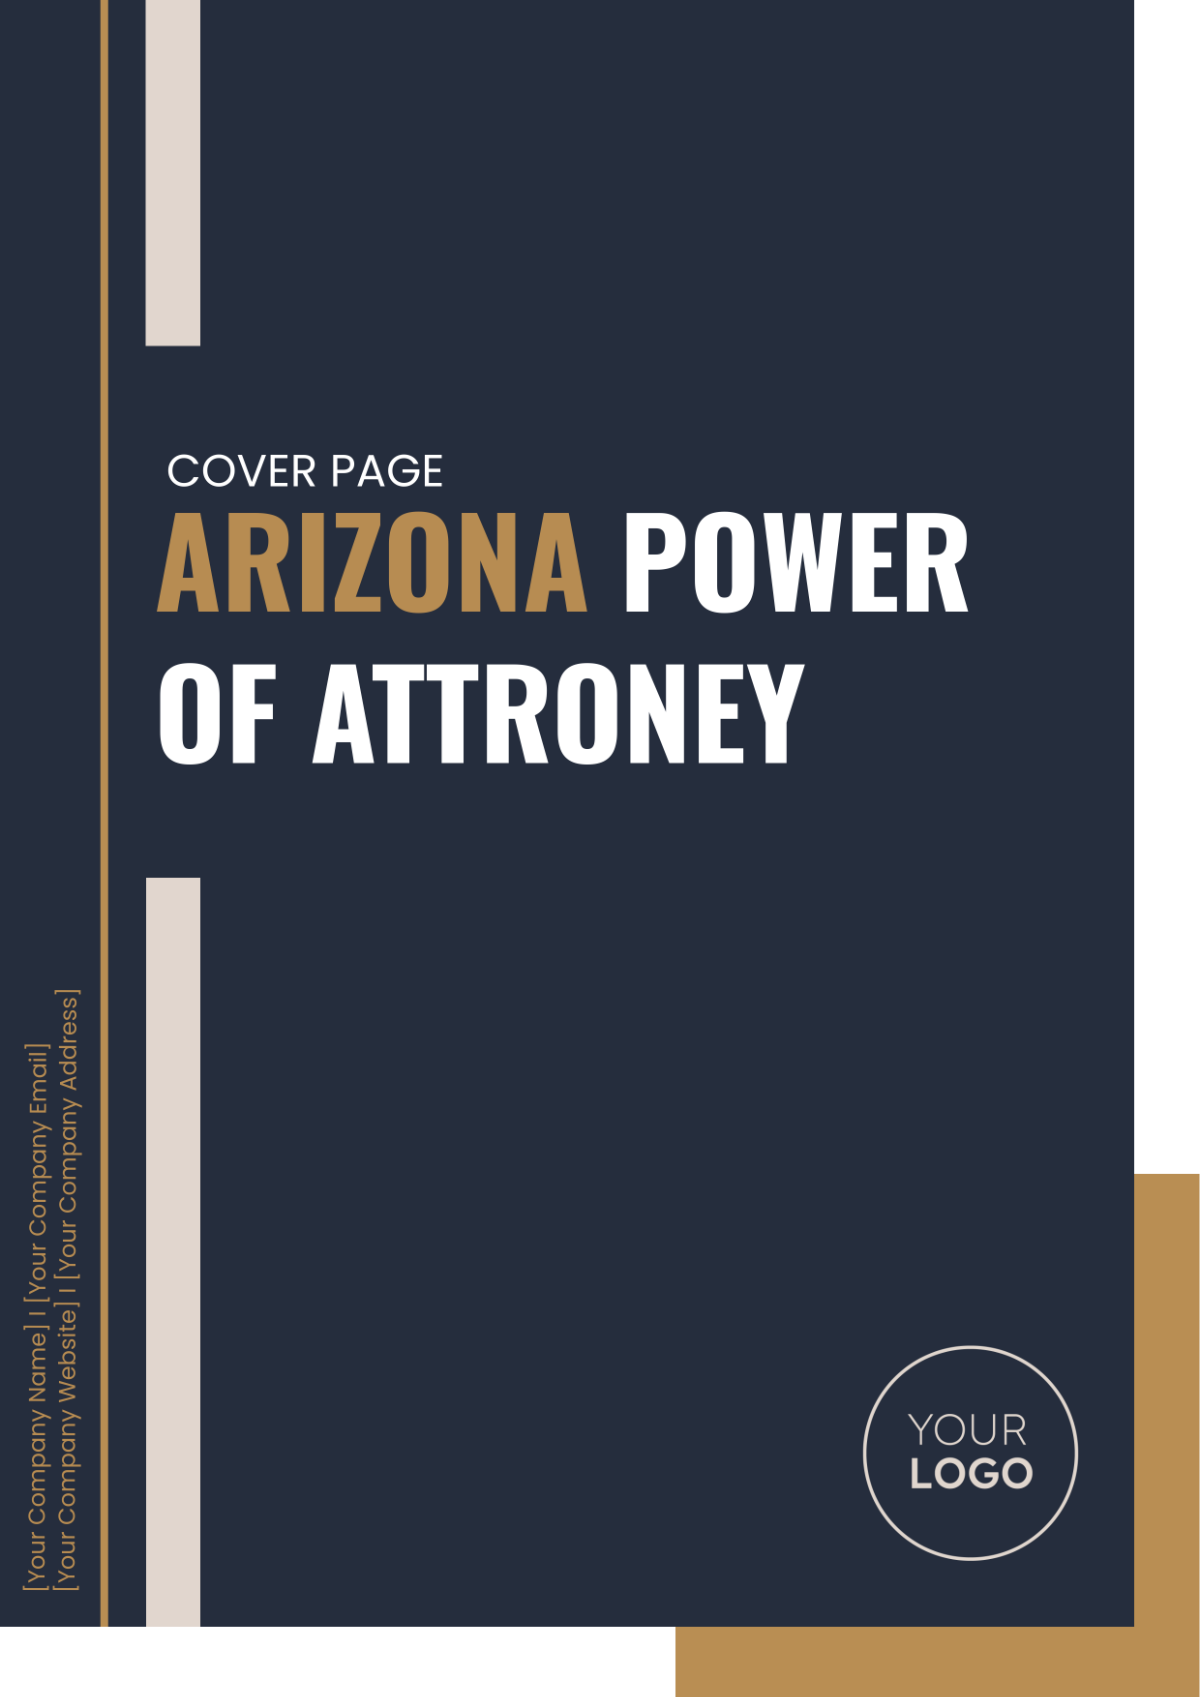 Arizona Power of Attorney Cover Page